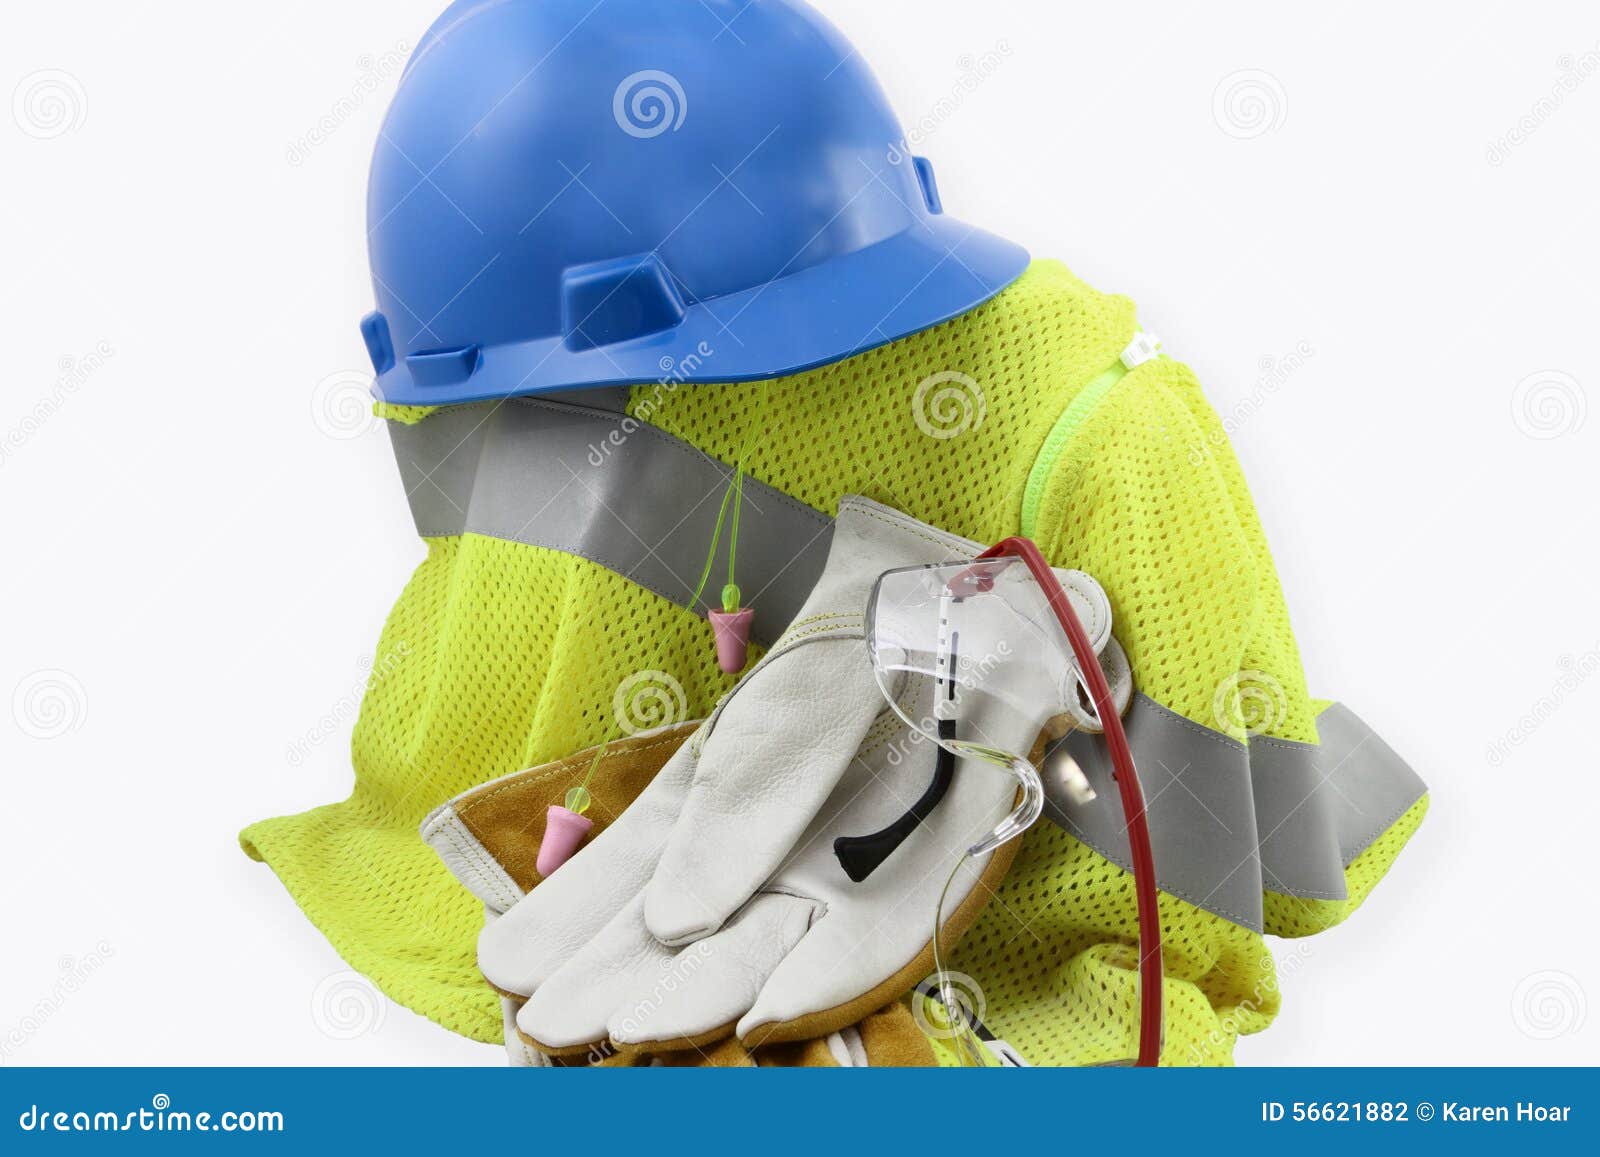 personal protective equipment in a pile